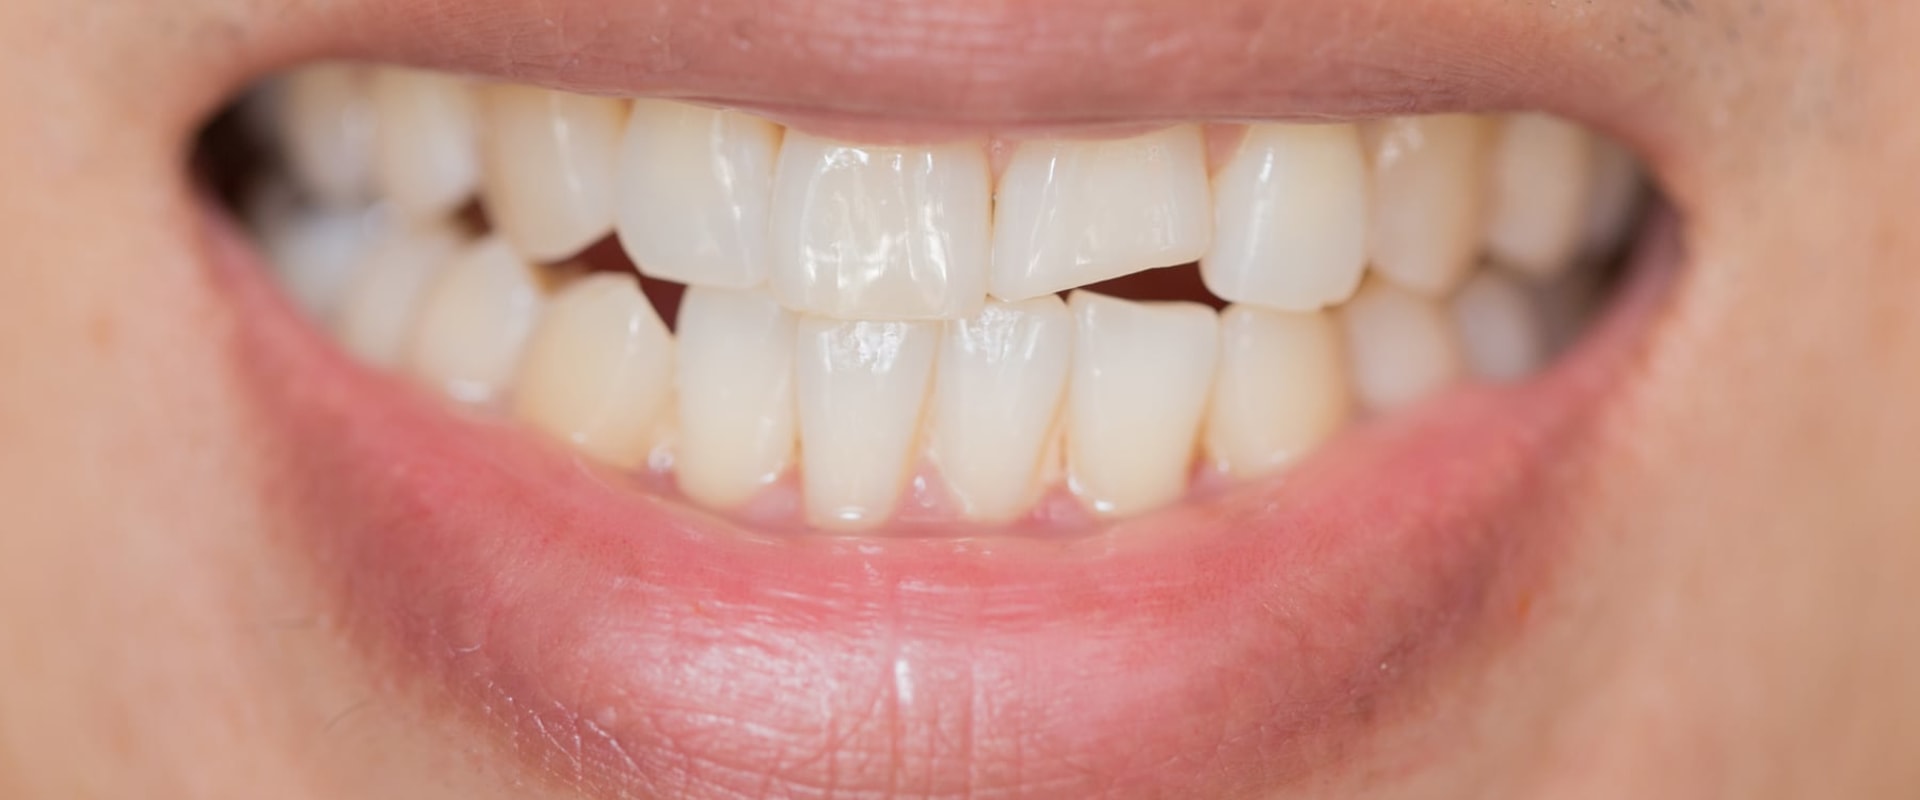 Can a Small Chipped Tooth Get Worse? - Expert Advice on Repairing a Chipped Tooth